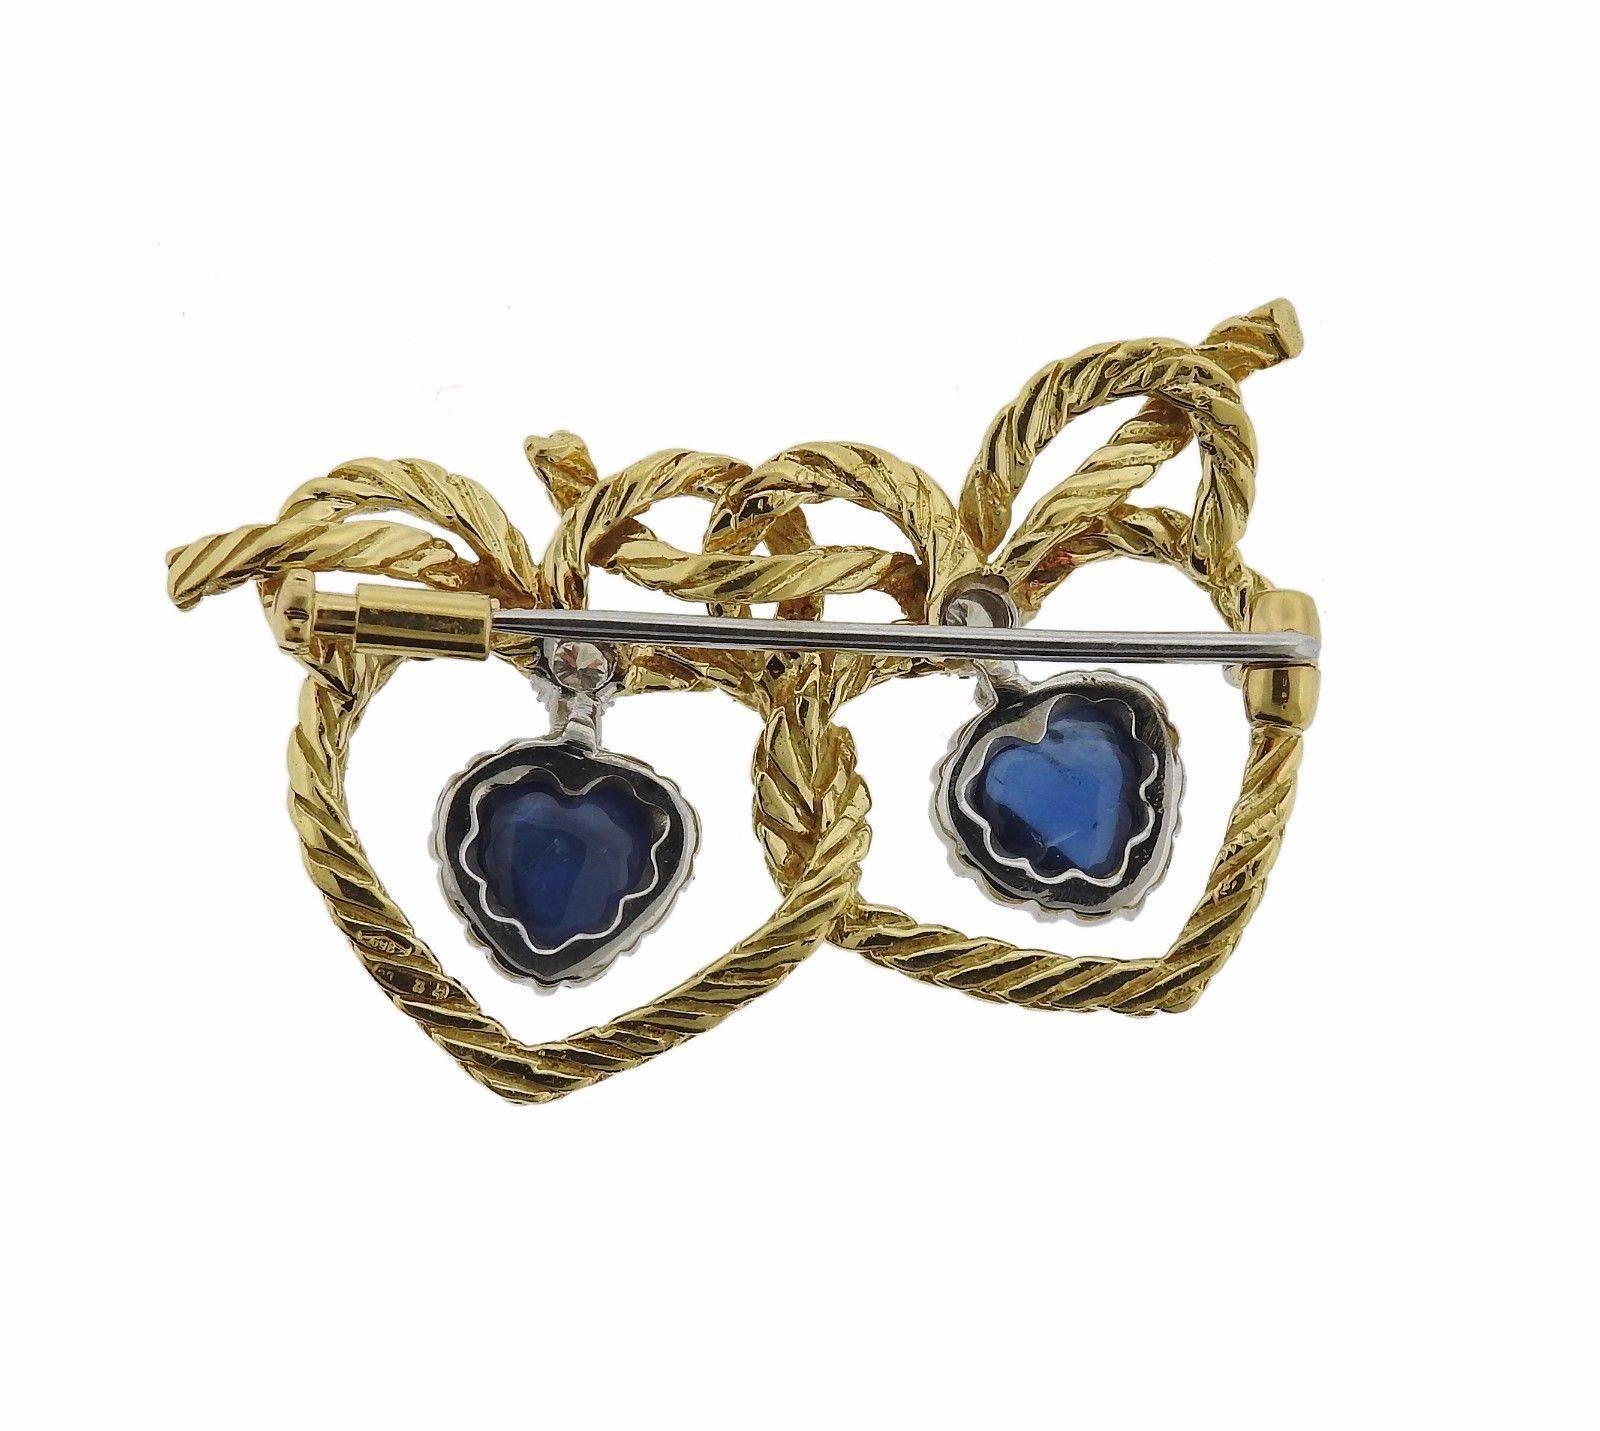 An 18k yellow gold brooch set with sapphires and approximately 0.11ctw of G/VS diamonds.  The brooch measures 36mm x 23mm and weighs 10.1 grams.  Marked: 750, 12 CG, 18k Buccellati.  Current retail is $5920.